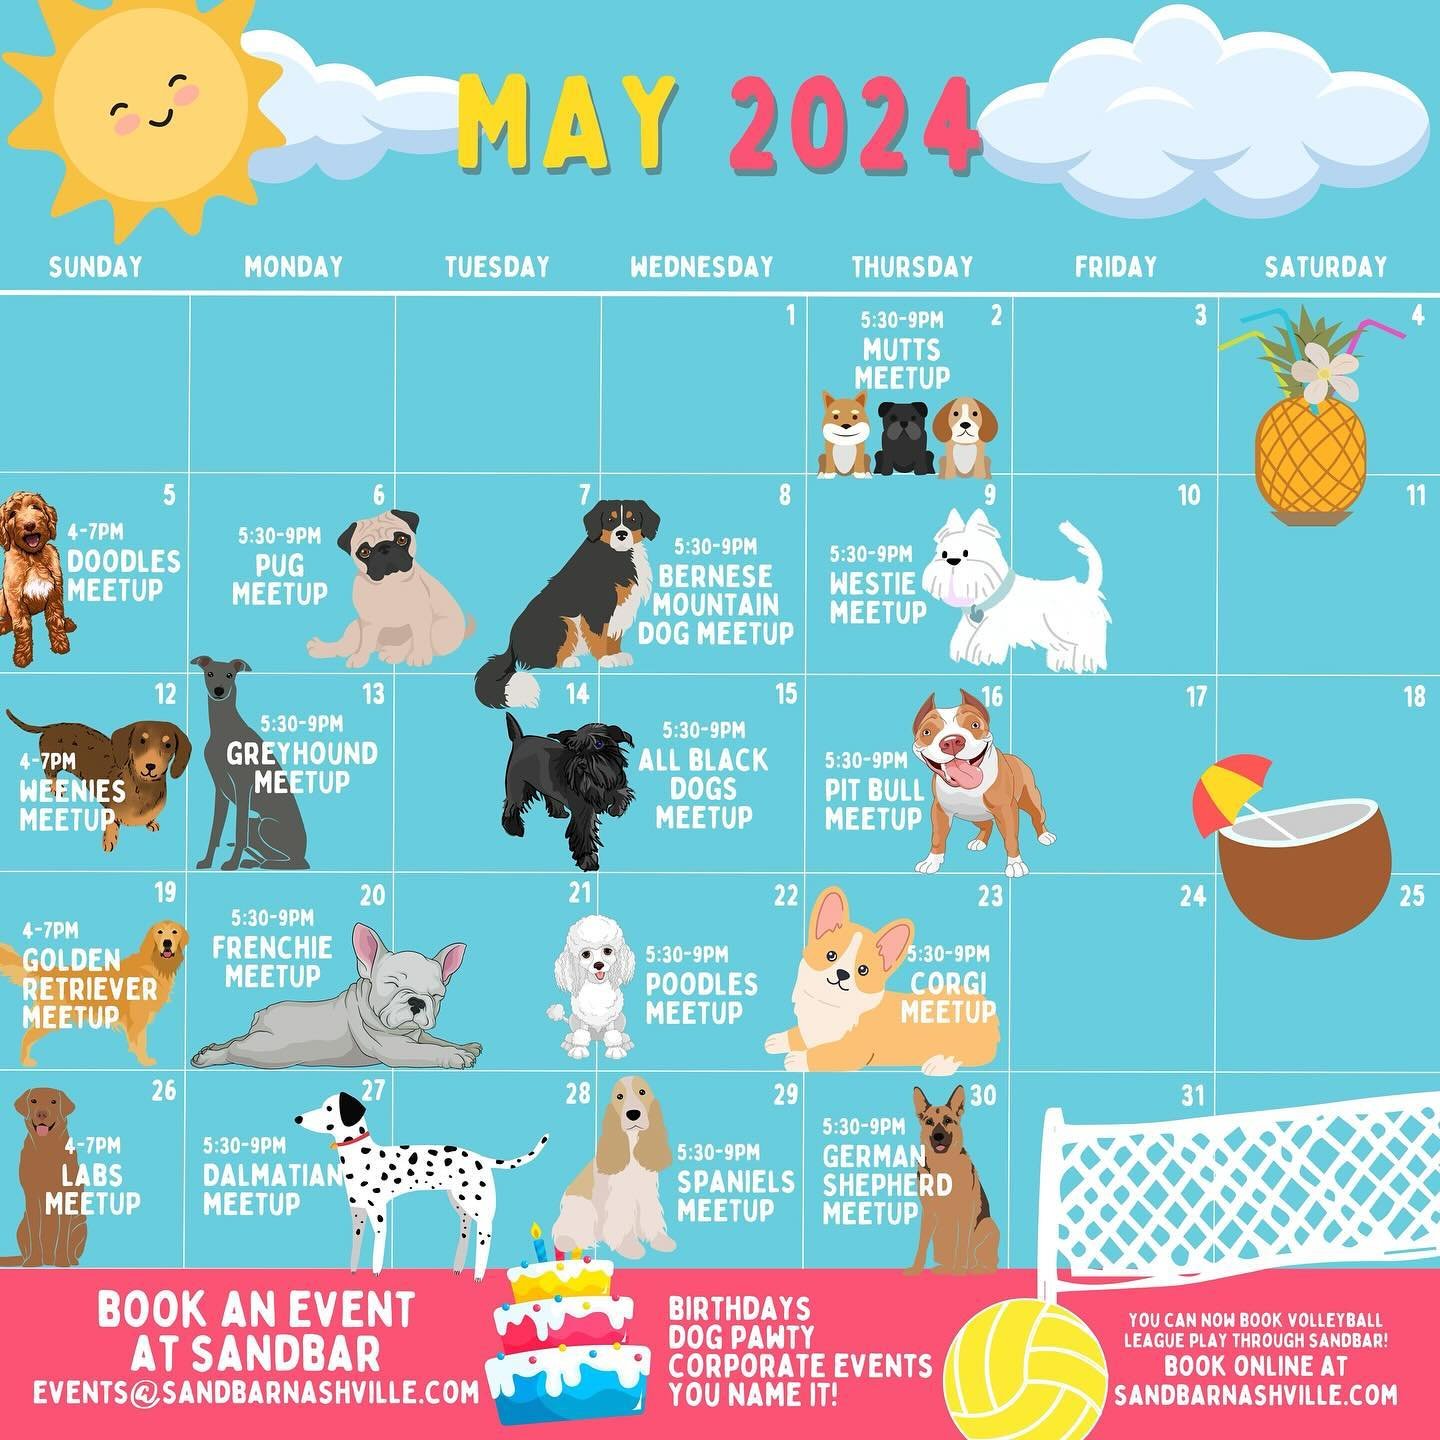 We wanted to go ahead and RE-release our May Dog Meet Up Calendar! We added some new requested breeds so make sure and check them out!! 🤗 April meetups have been a great success so we are even more excited about May 🥳🥳 Thank you to all the dog mom